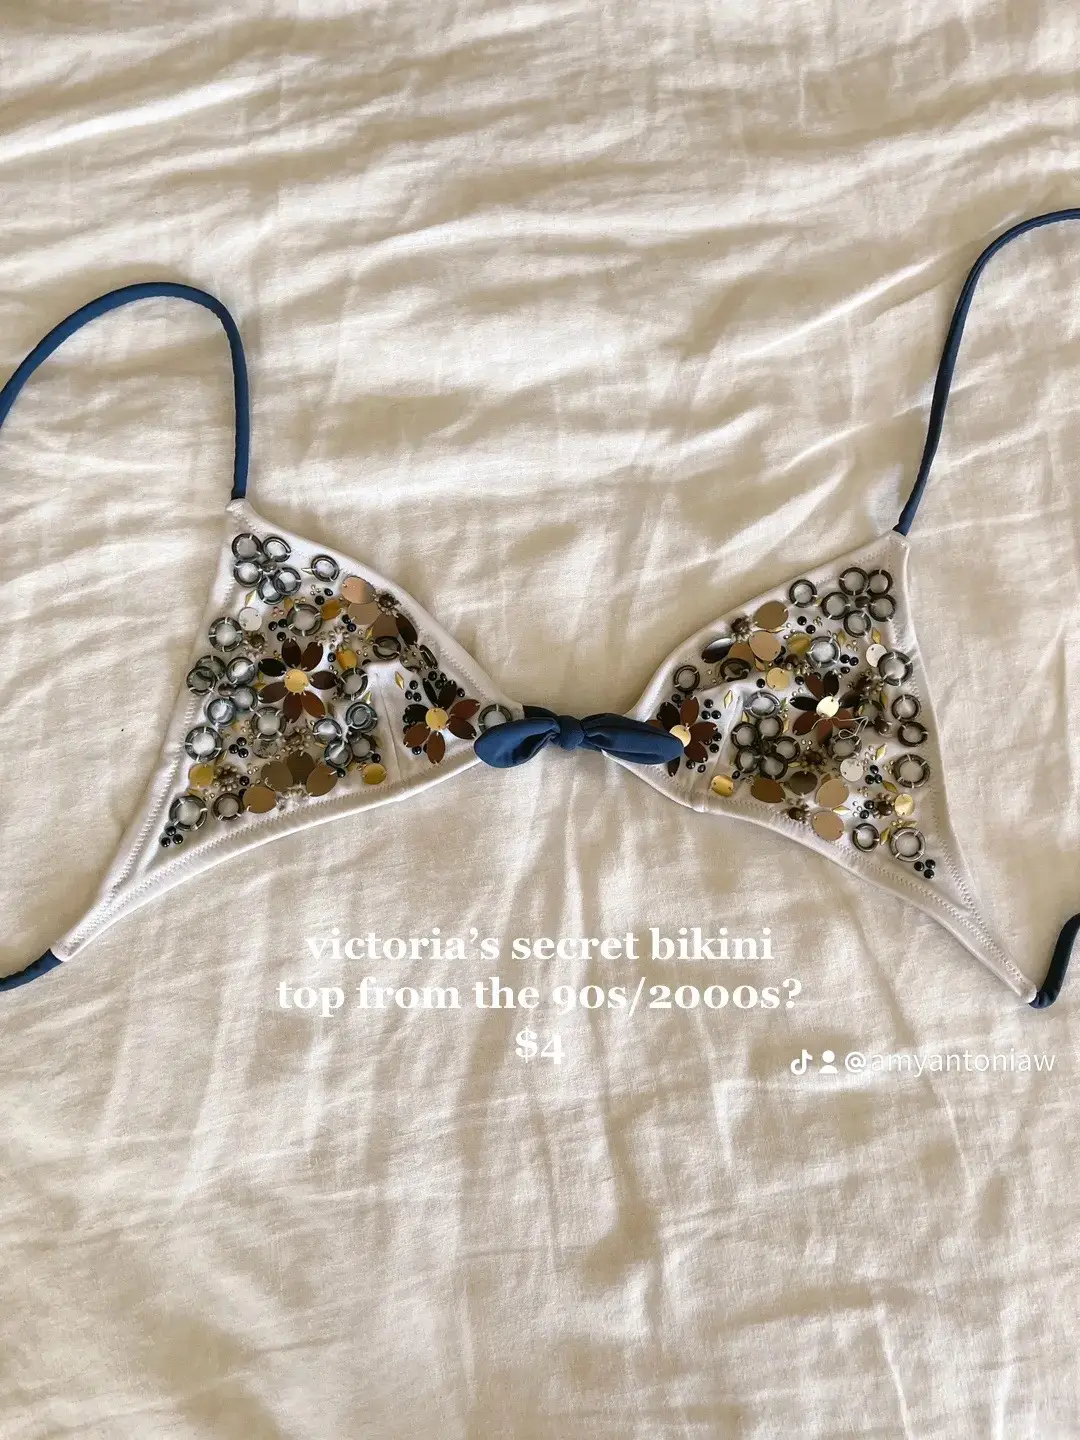  A bikini top from the 90s/2000s with a price of $4.